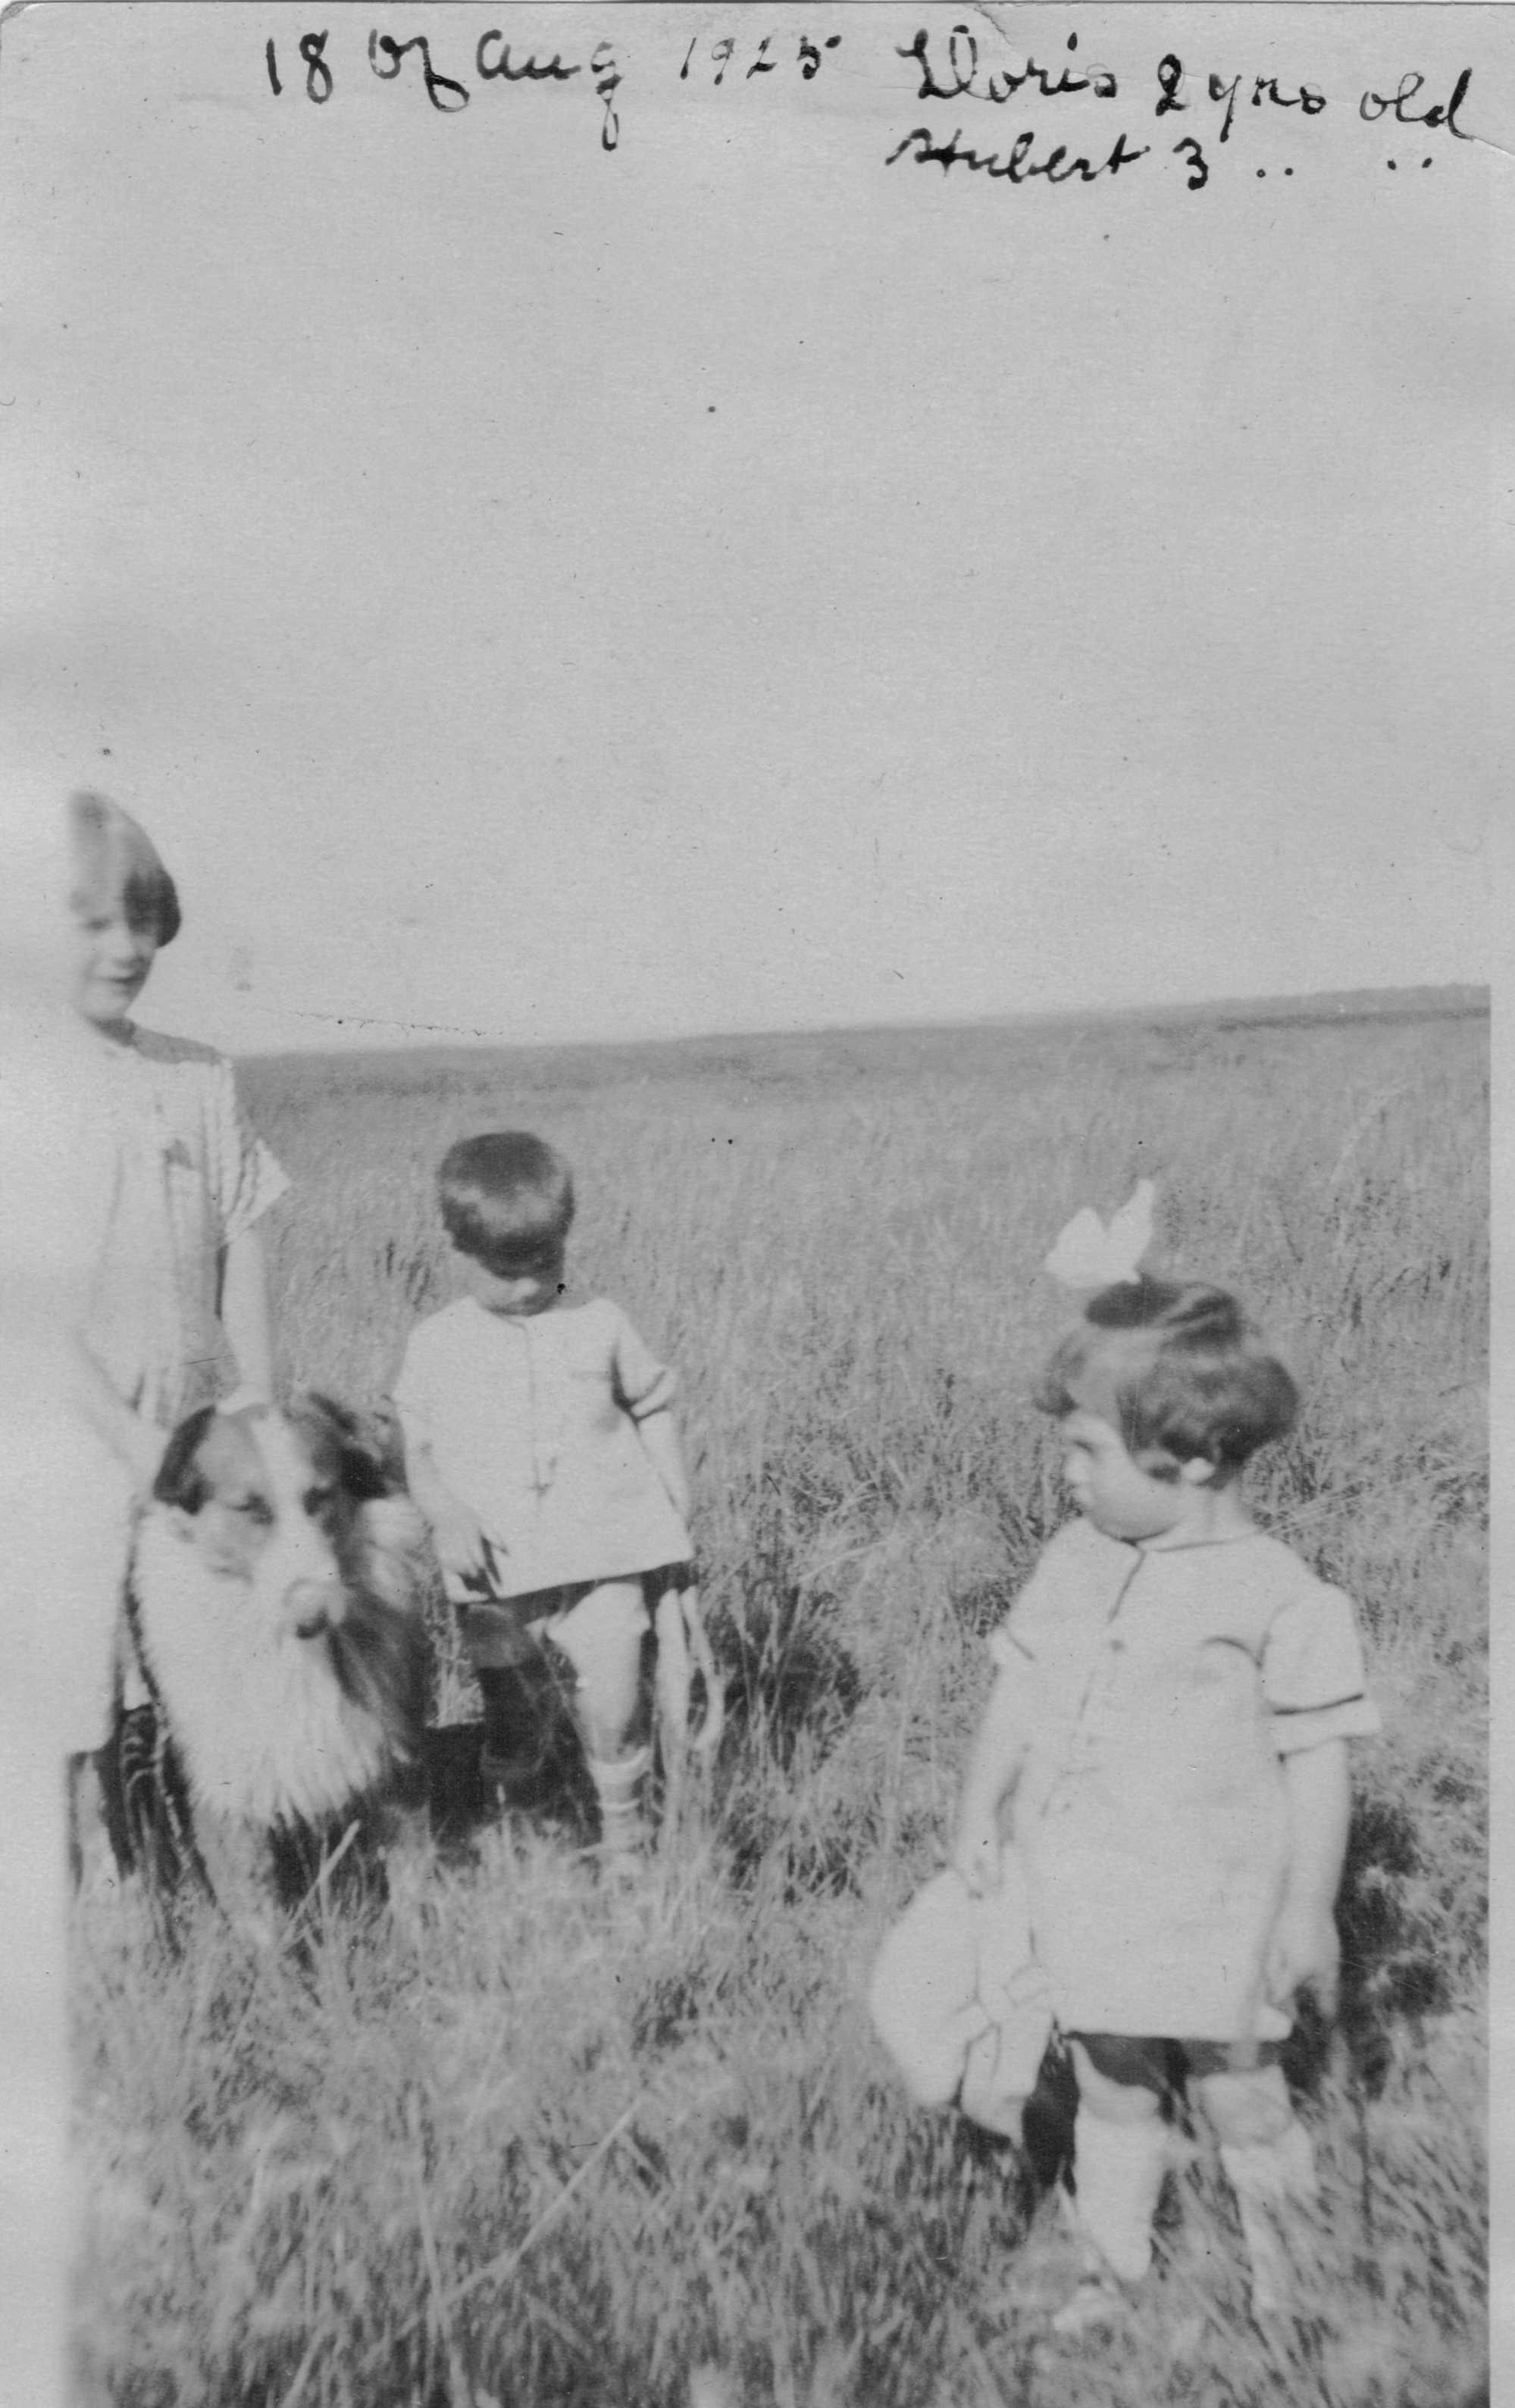 August 18, 1925 Doris and Hubert Brooks in Field With Dog 